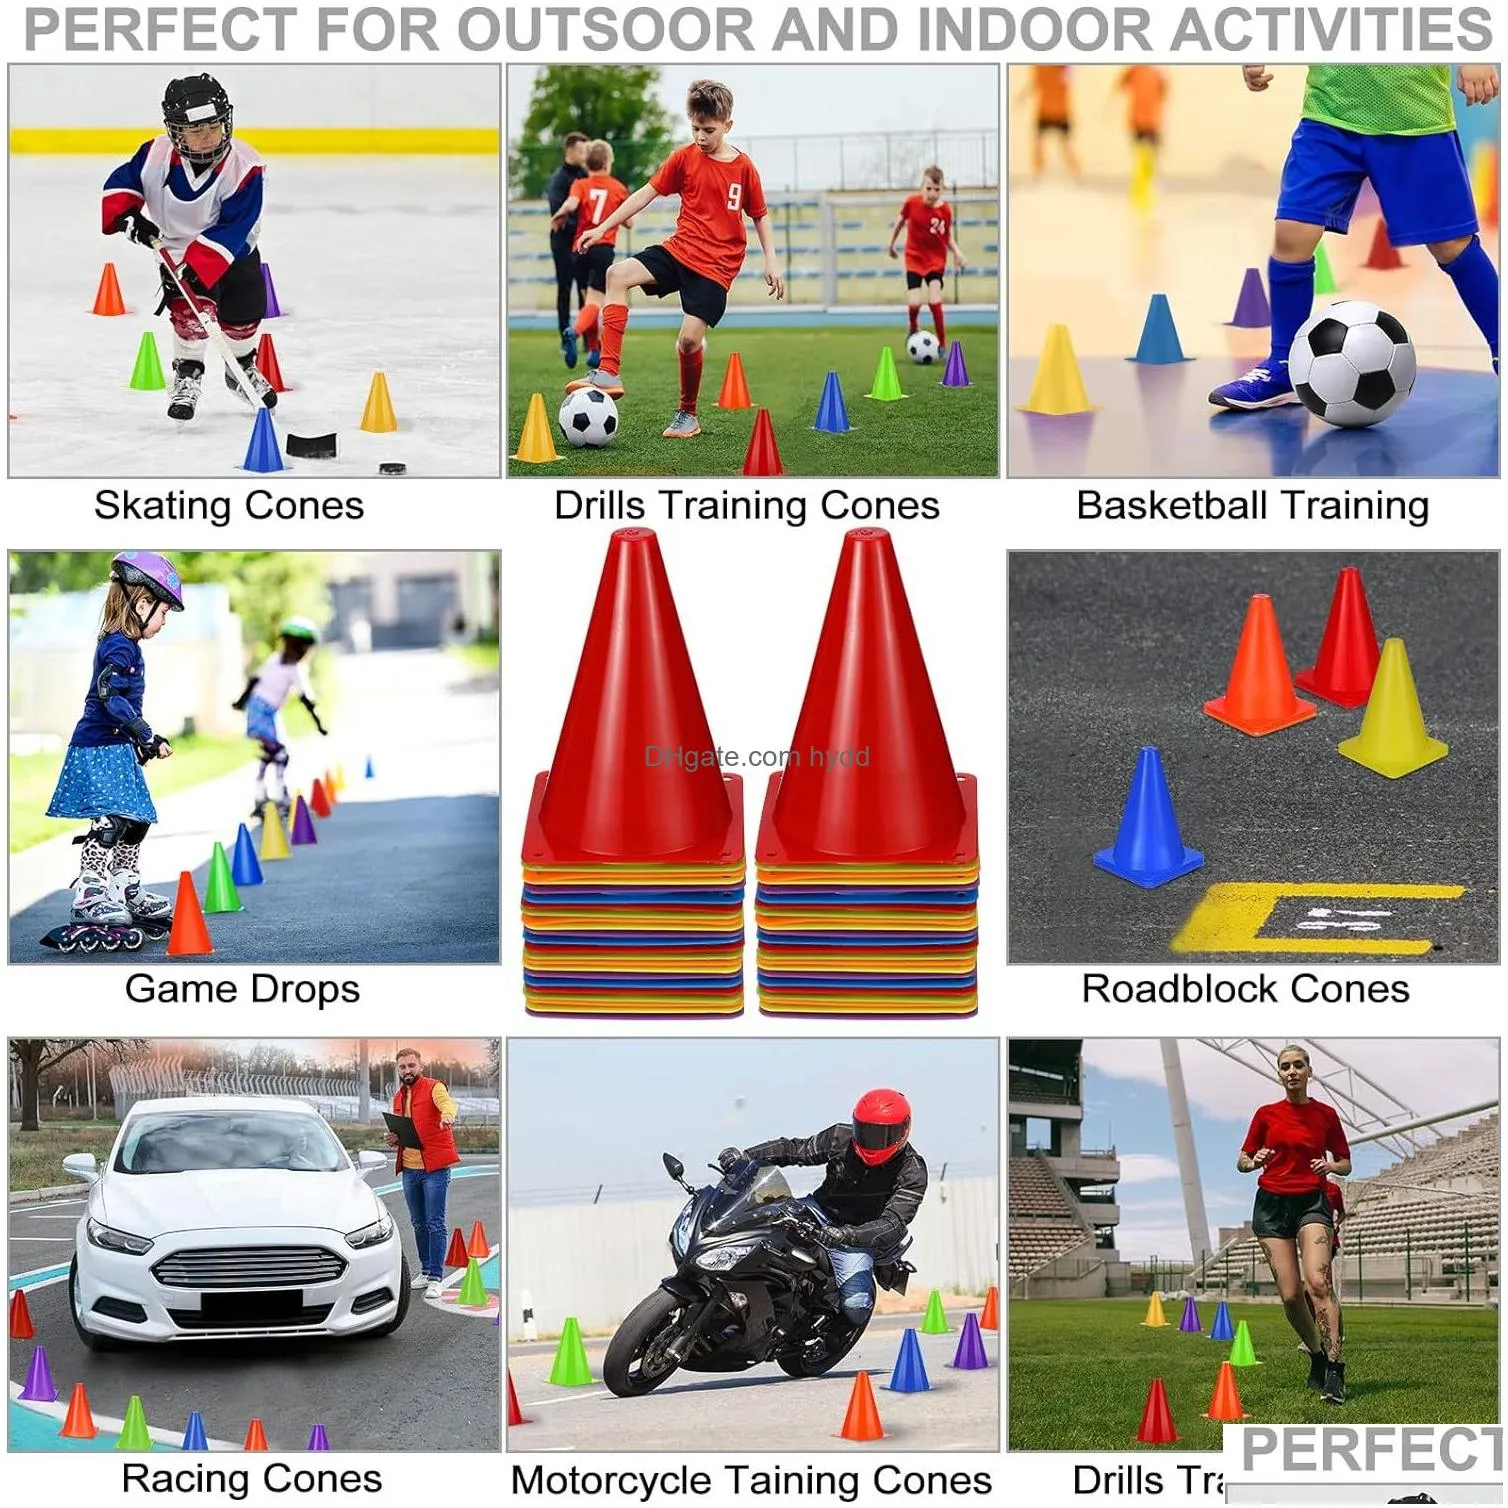 48 pack 7 inch plastic traffic cones agility field marker soccer cones safety cones sports cones training cones for skating